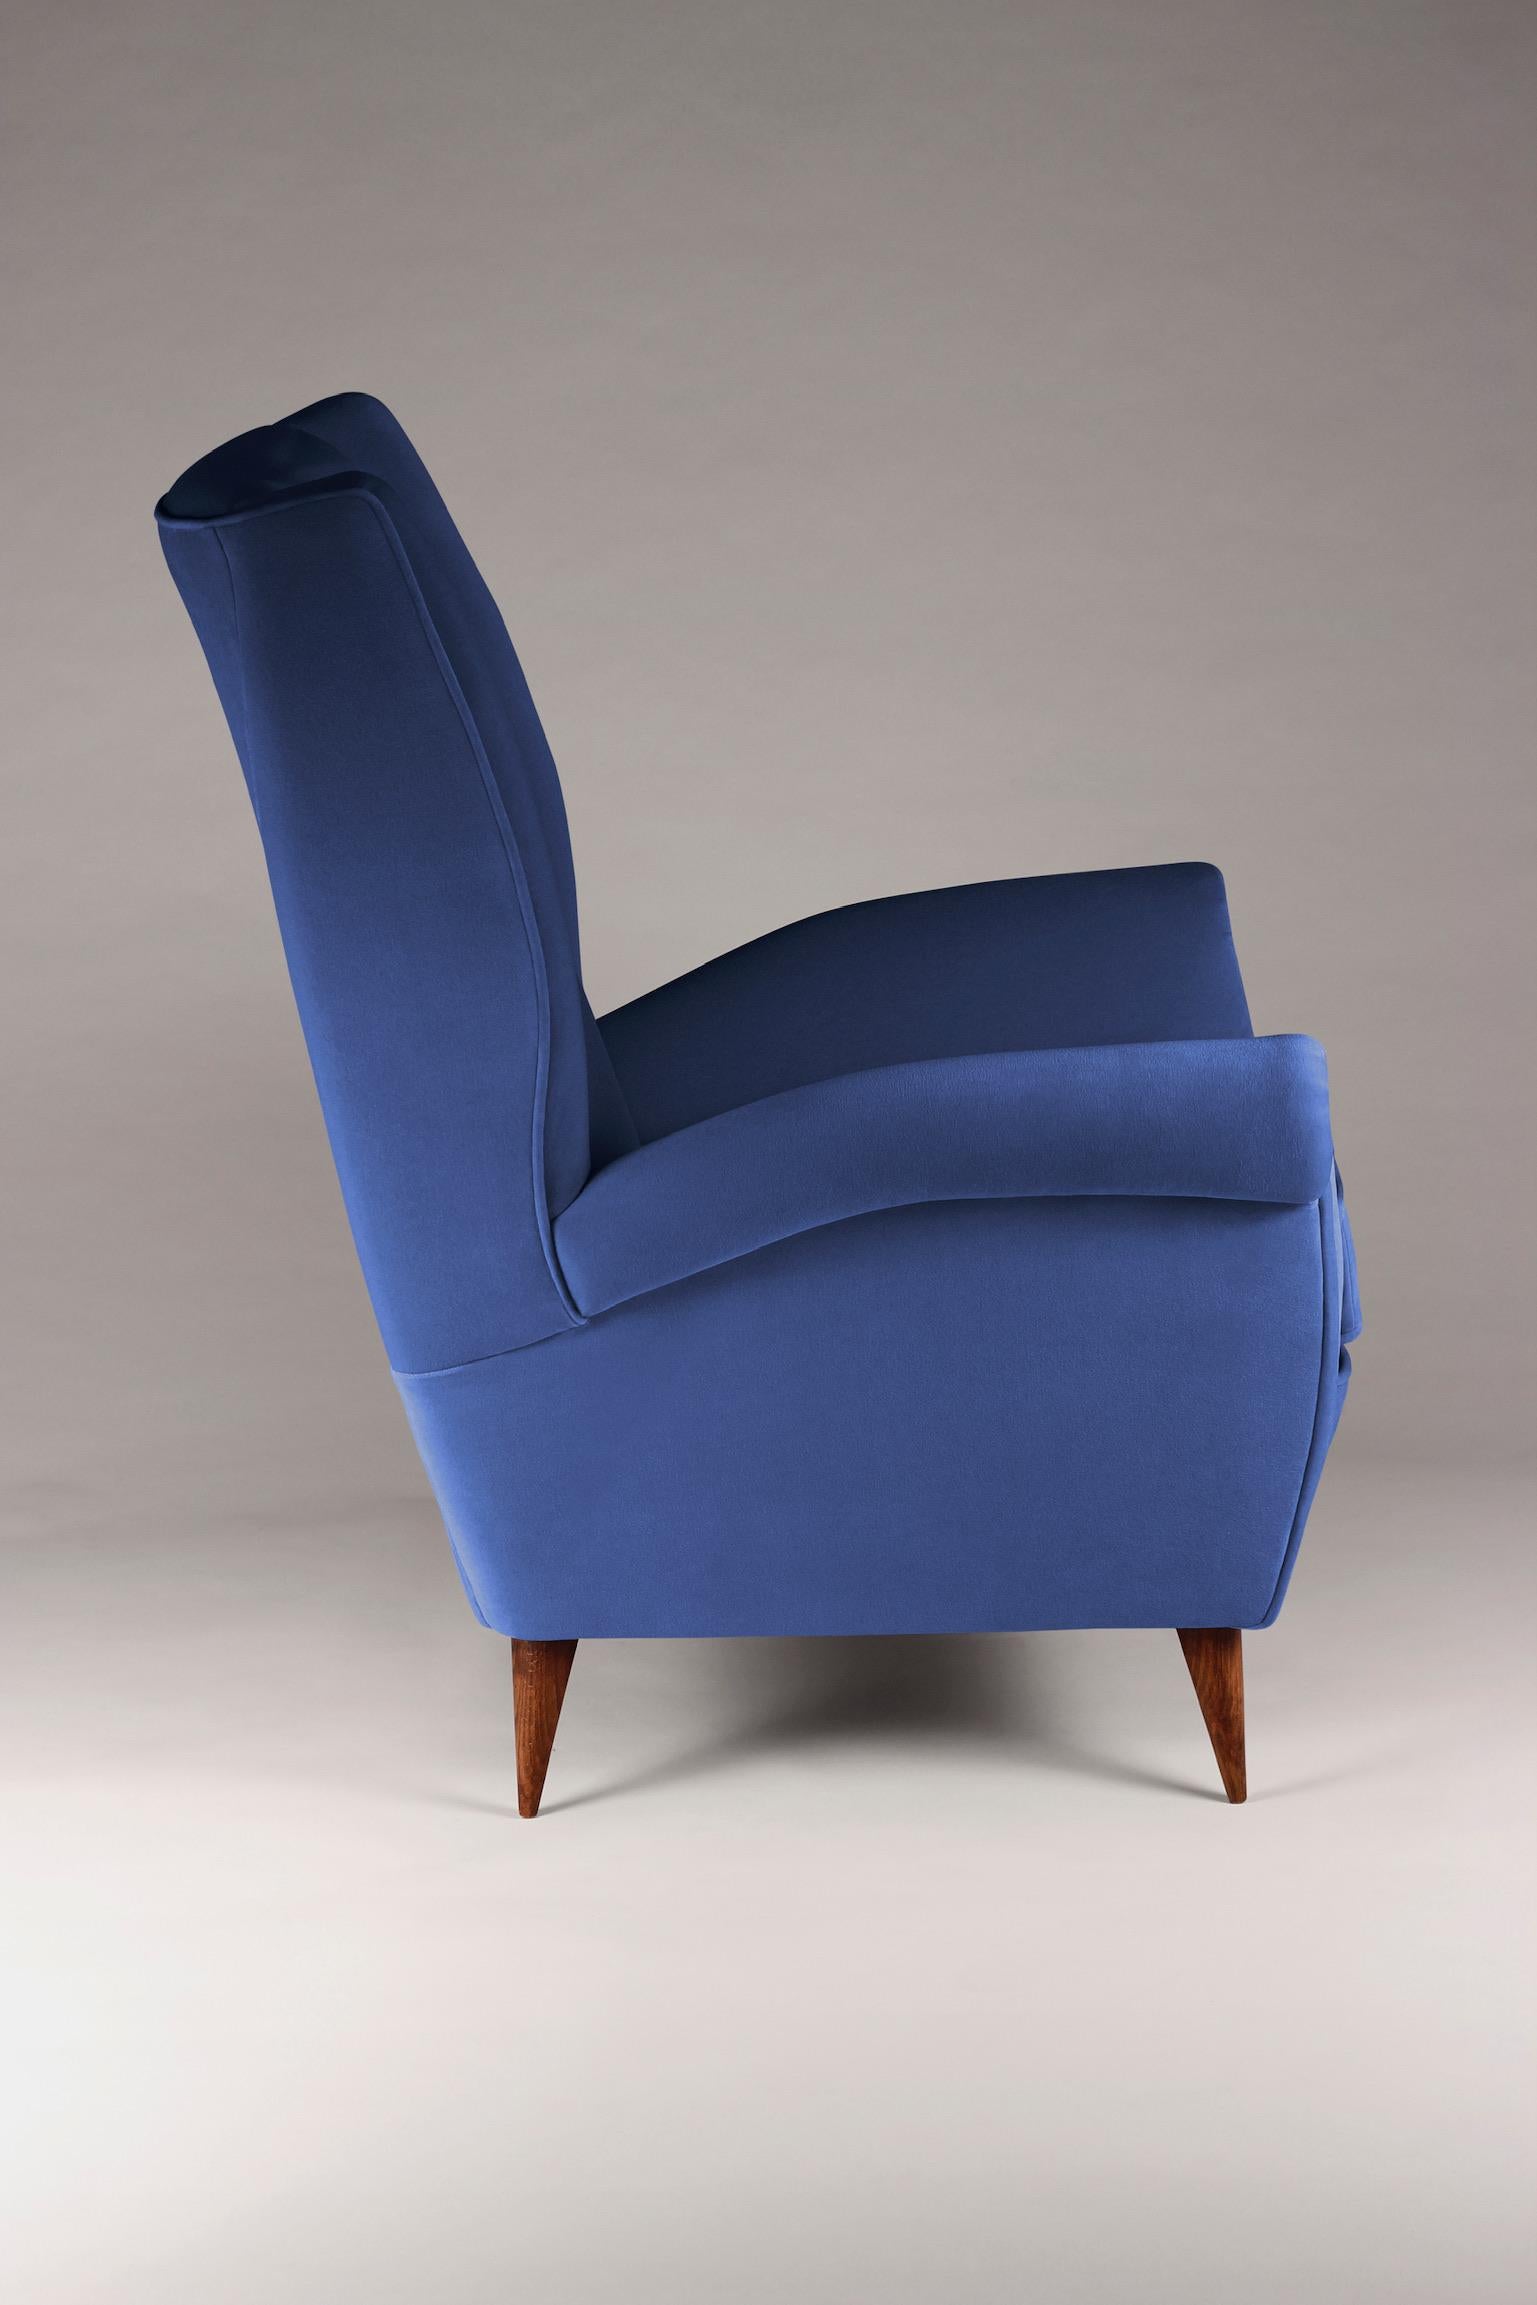 Contemporary Mid-Century Modern Inspired Italian Style ‘Marcello’ Lounge Chair For Sale